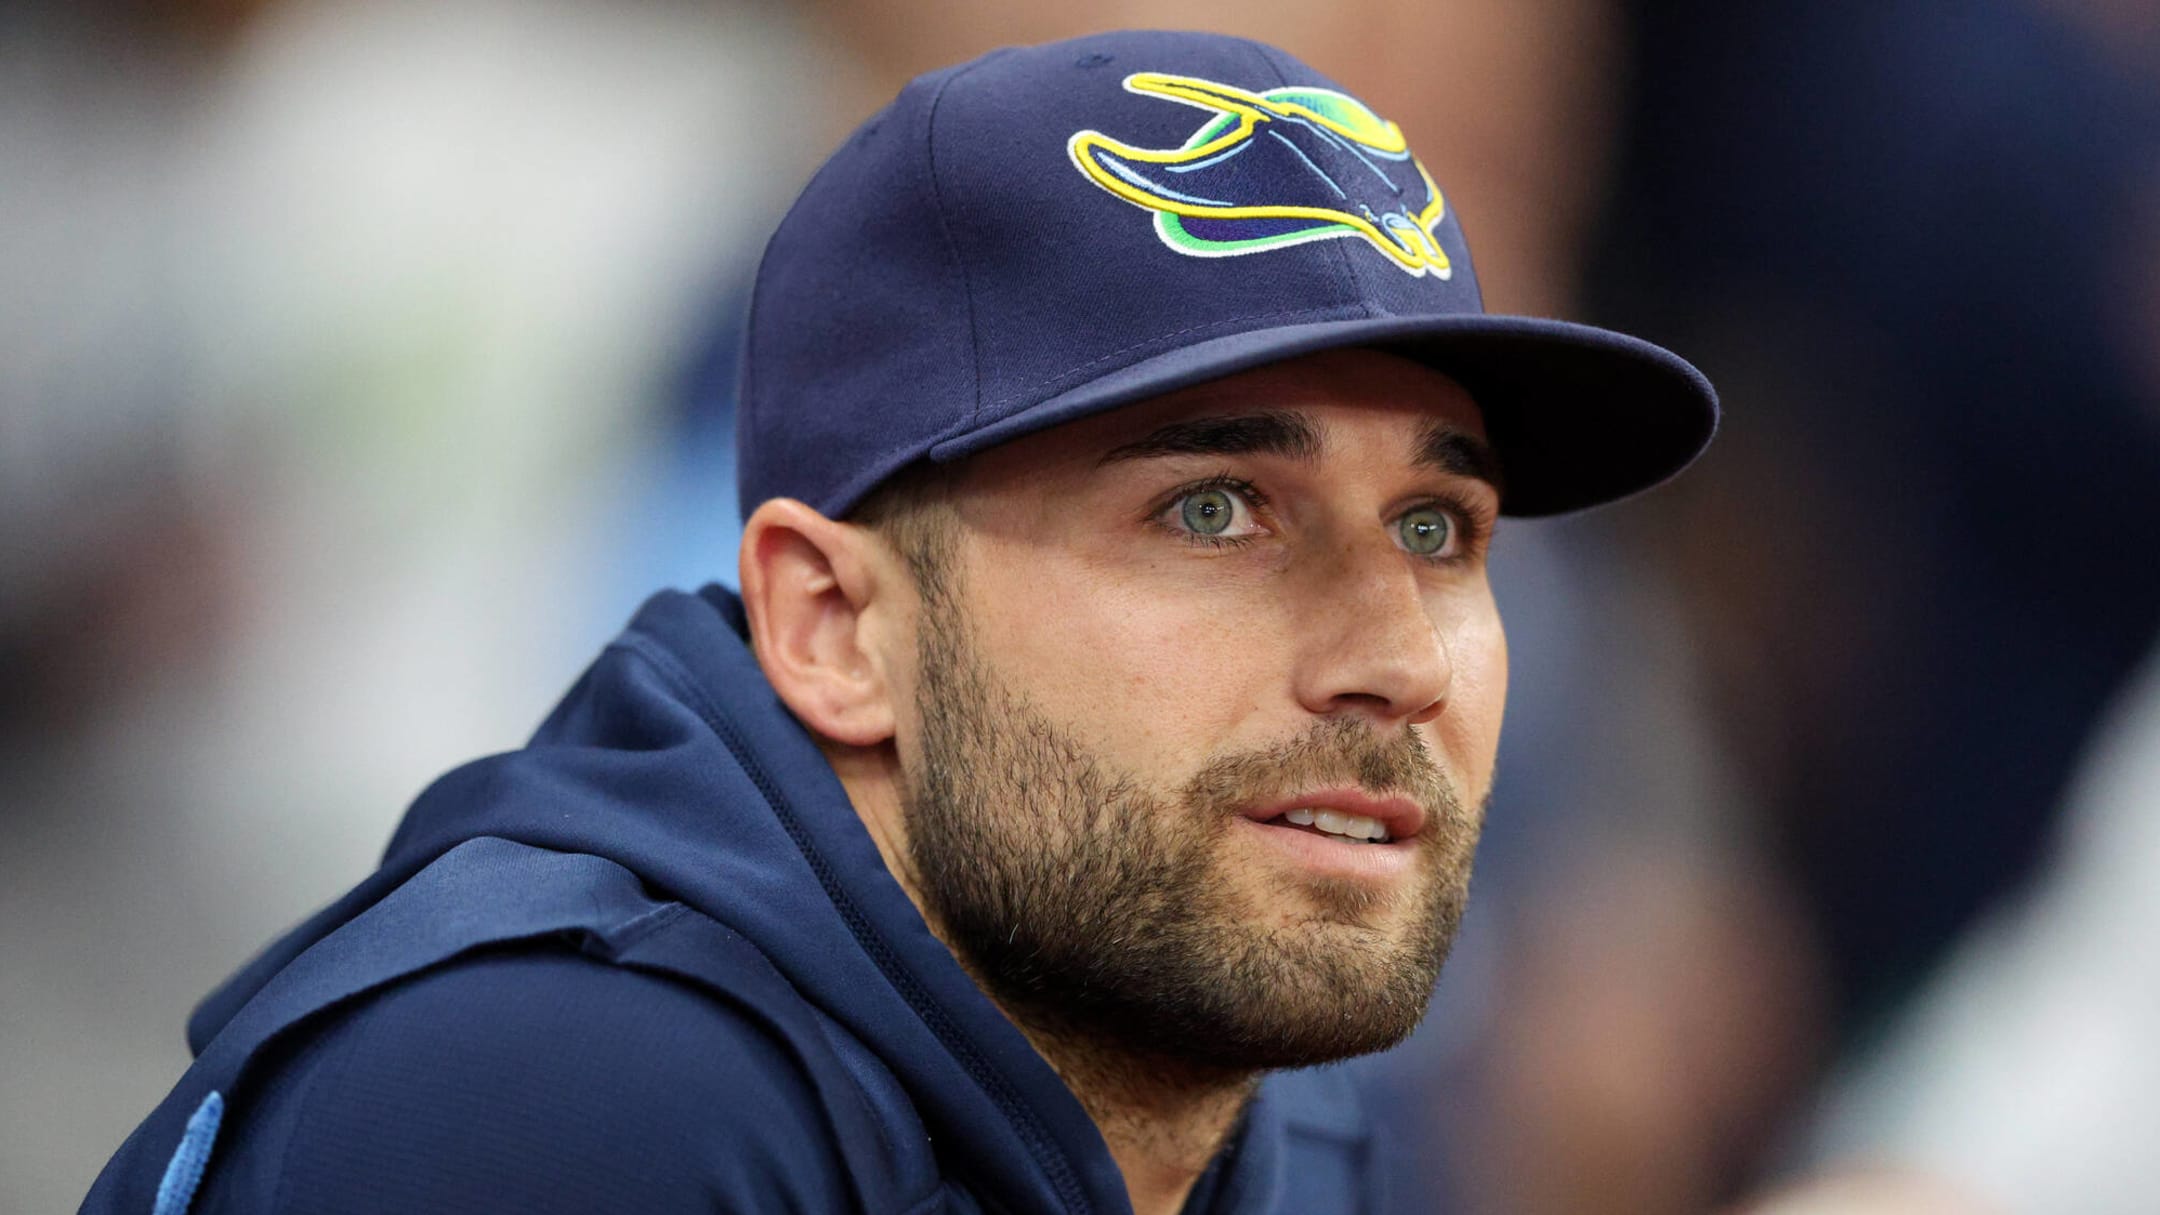 Report: Blue Jays agree to deal with Kiermaier